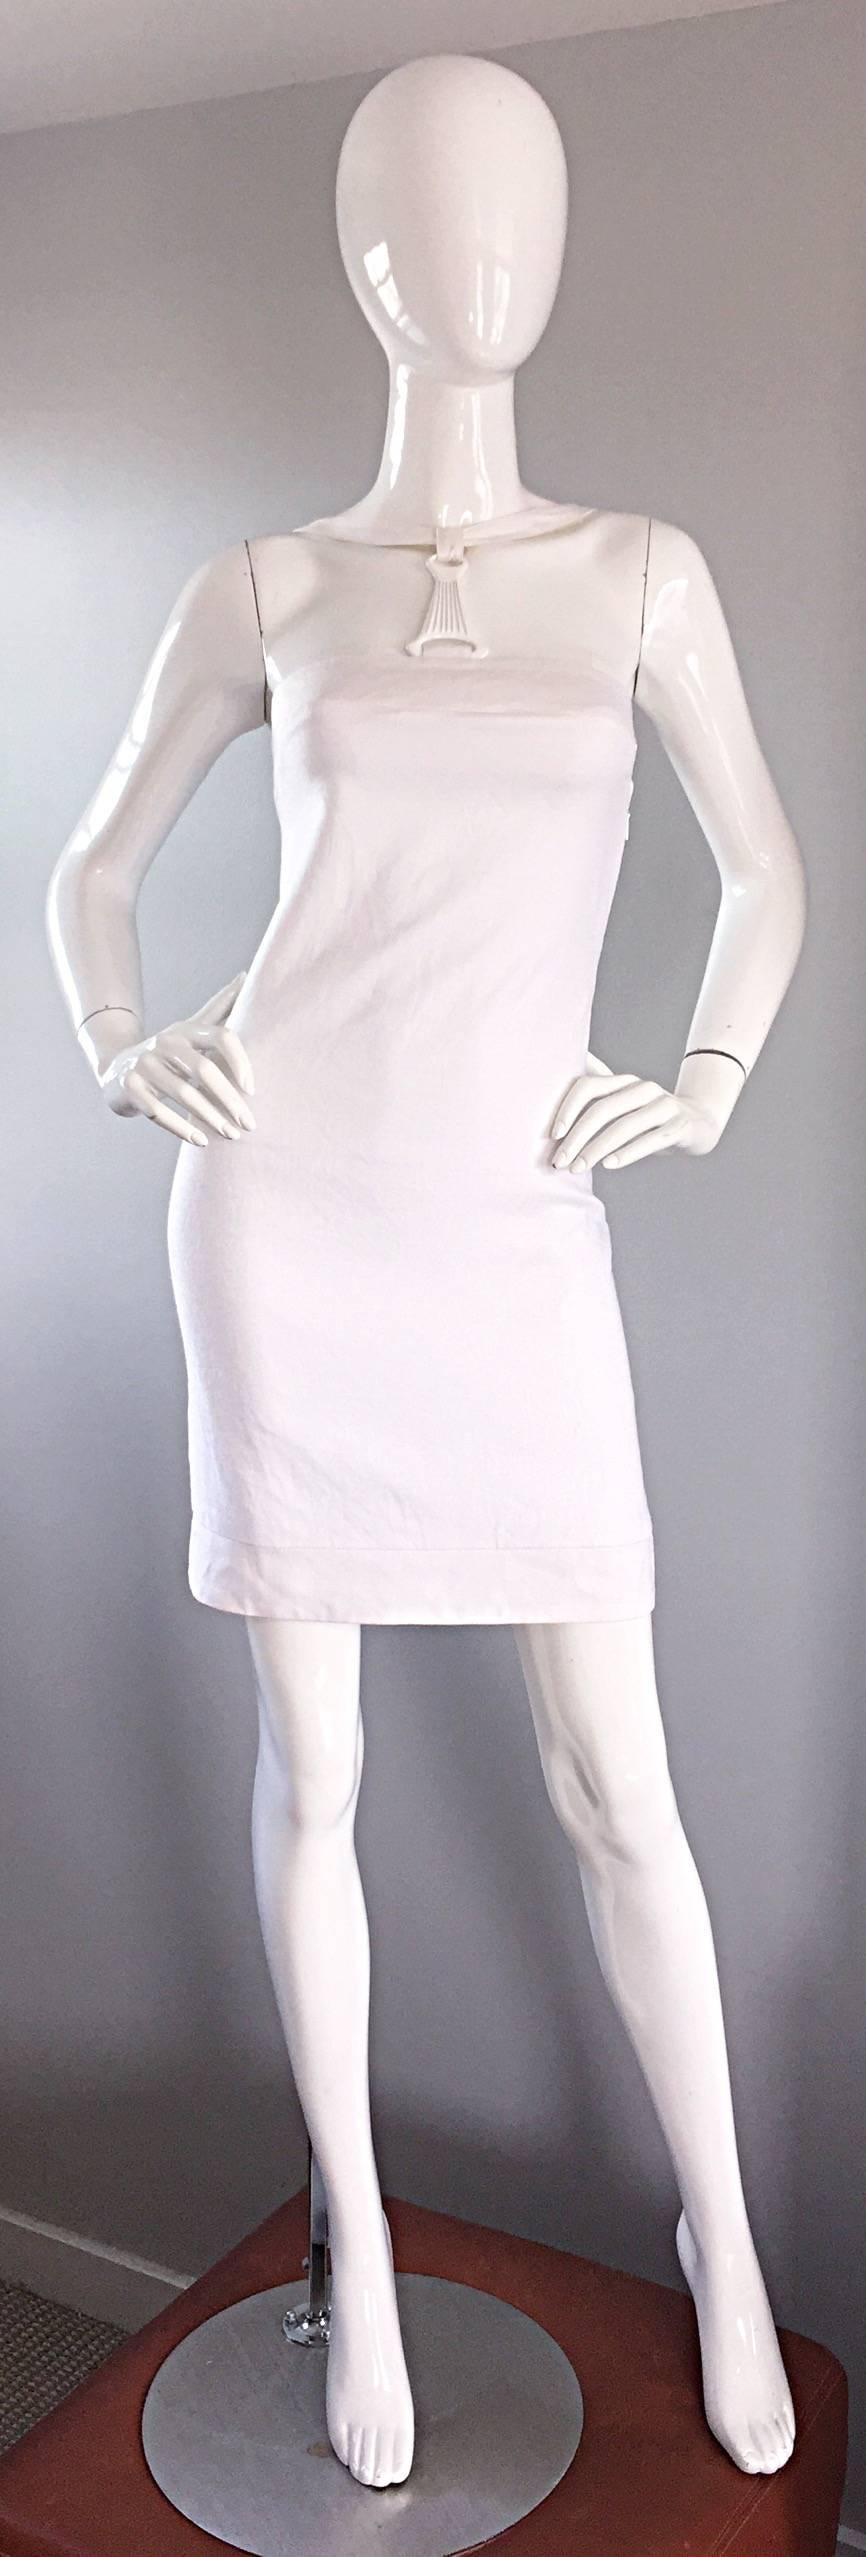 Sexy rare vintage early 2000s GIANNI VERSACE white bondage linen dress! Flattering BodyCon fit that does wonders for the body! Fully lined. Features a white metal 'harness' with signature Medusa head. Multiple hidden snaps to fasten the harness at